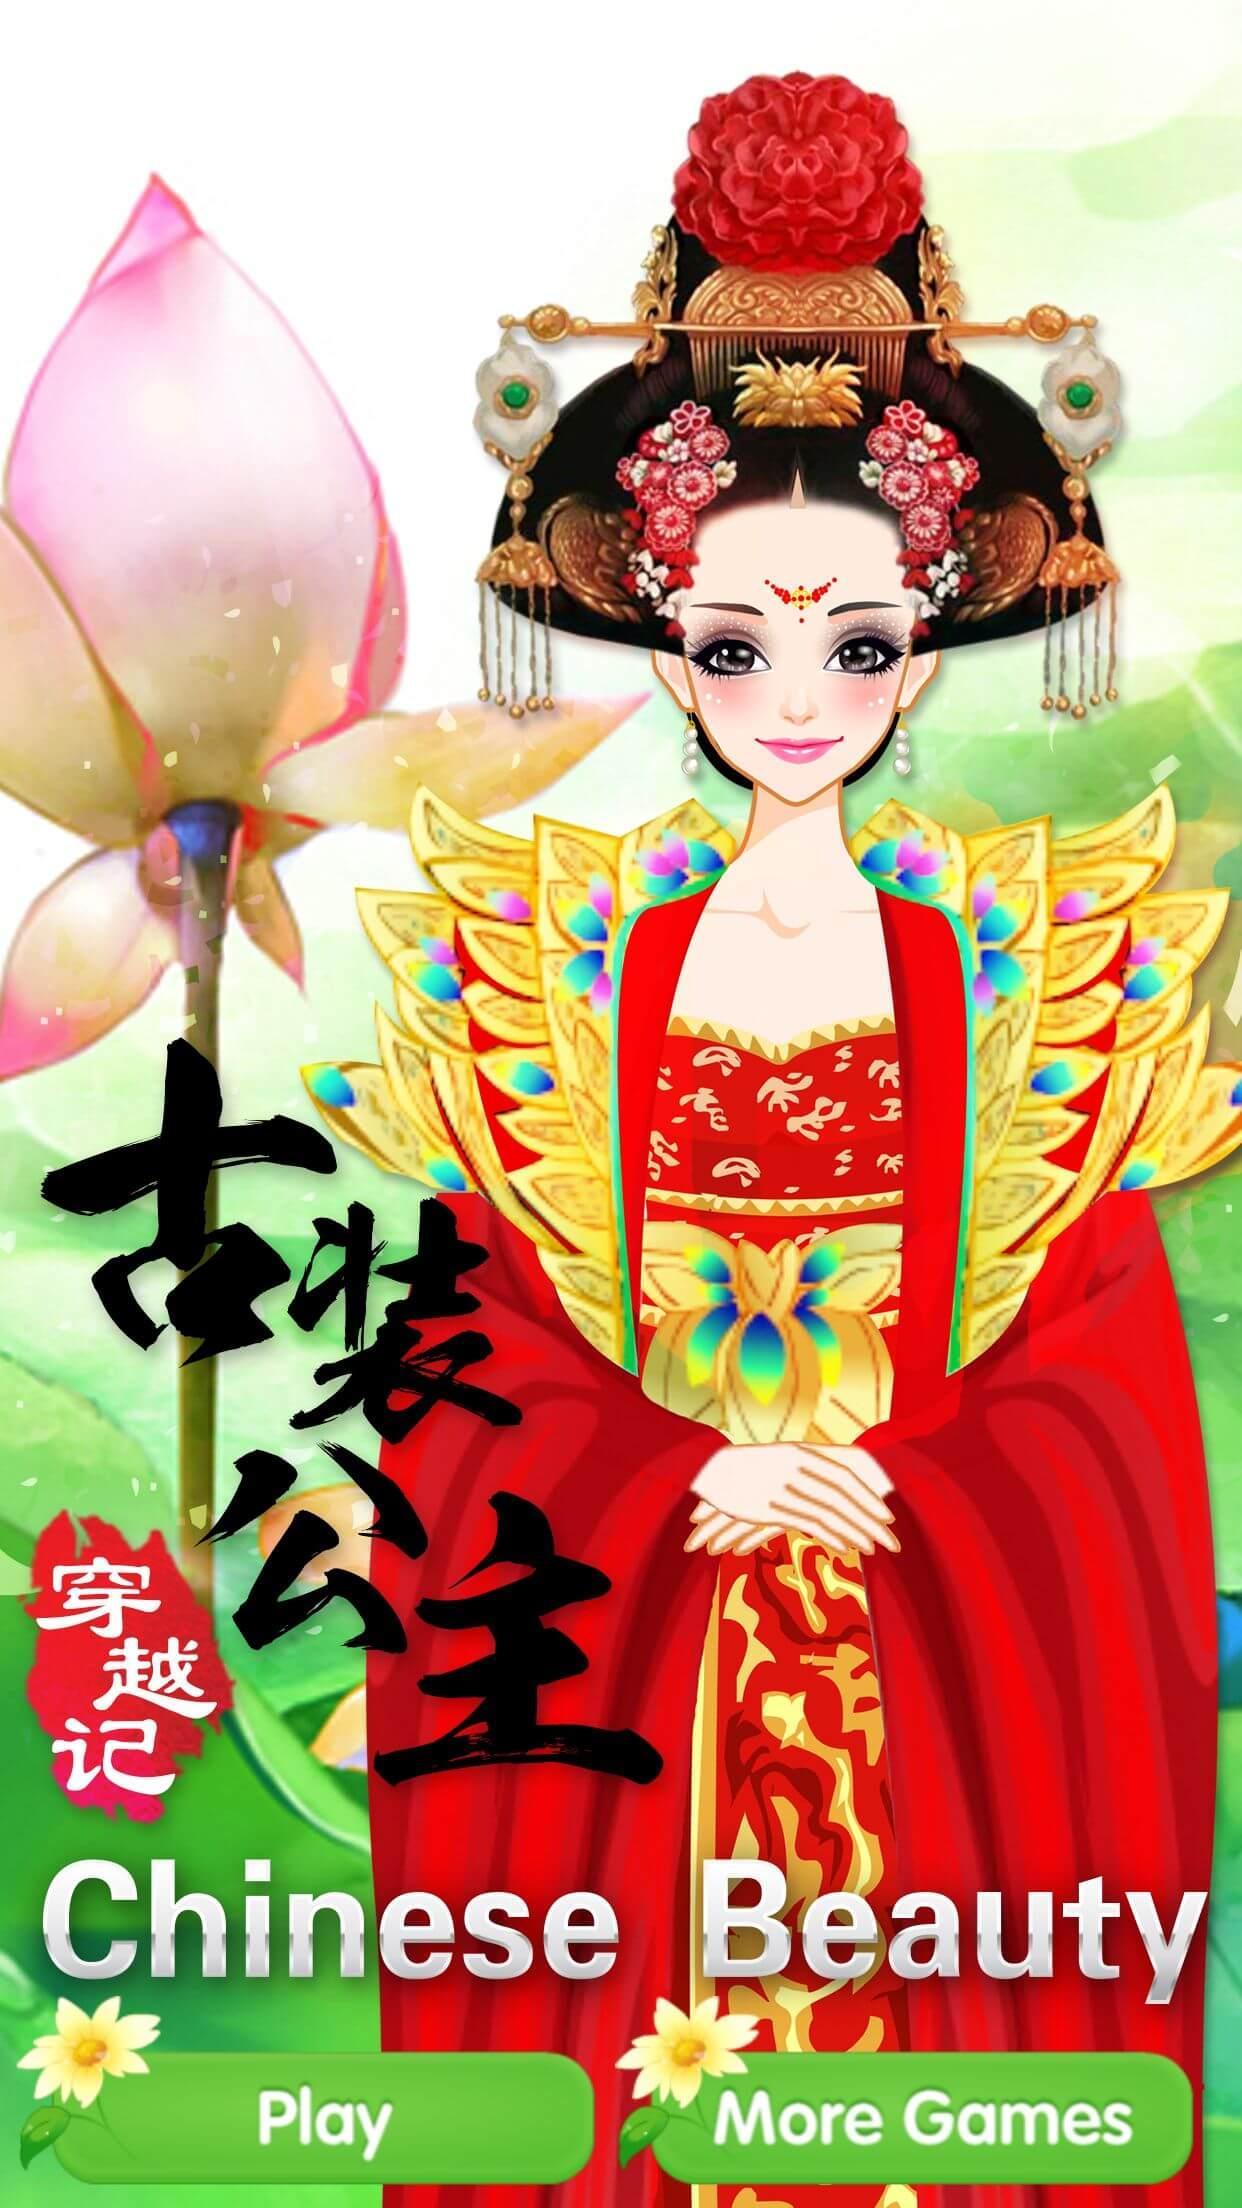 Chinese Beauty - Girls Game for Android - APK Download